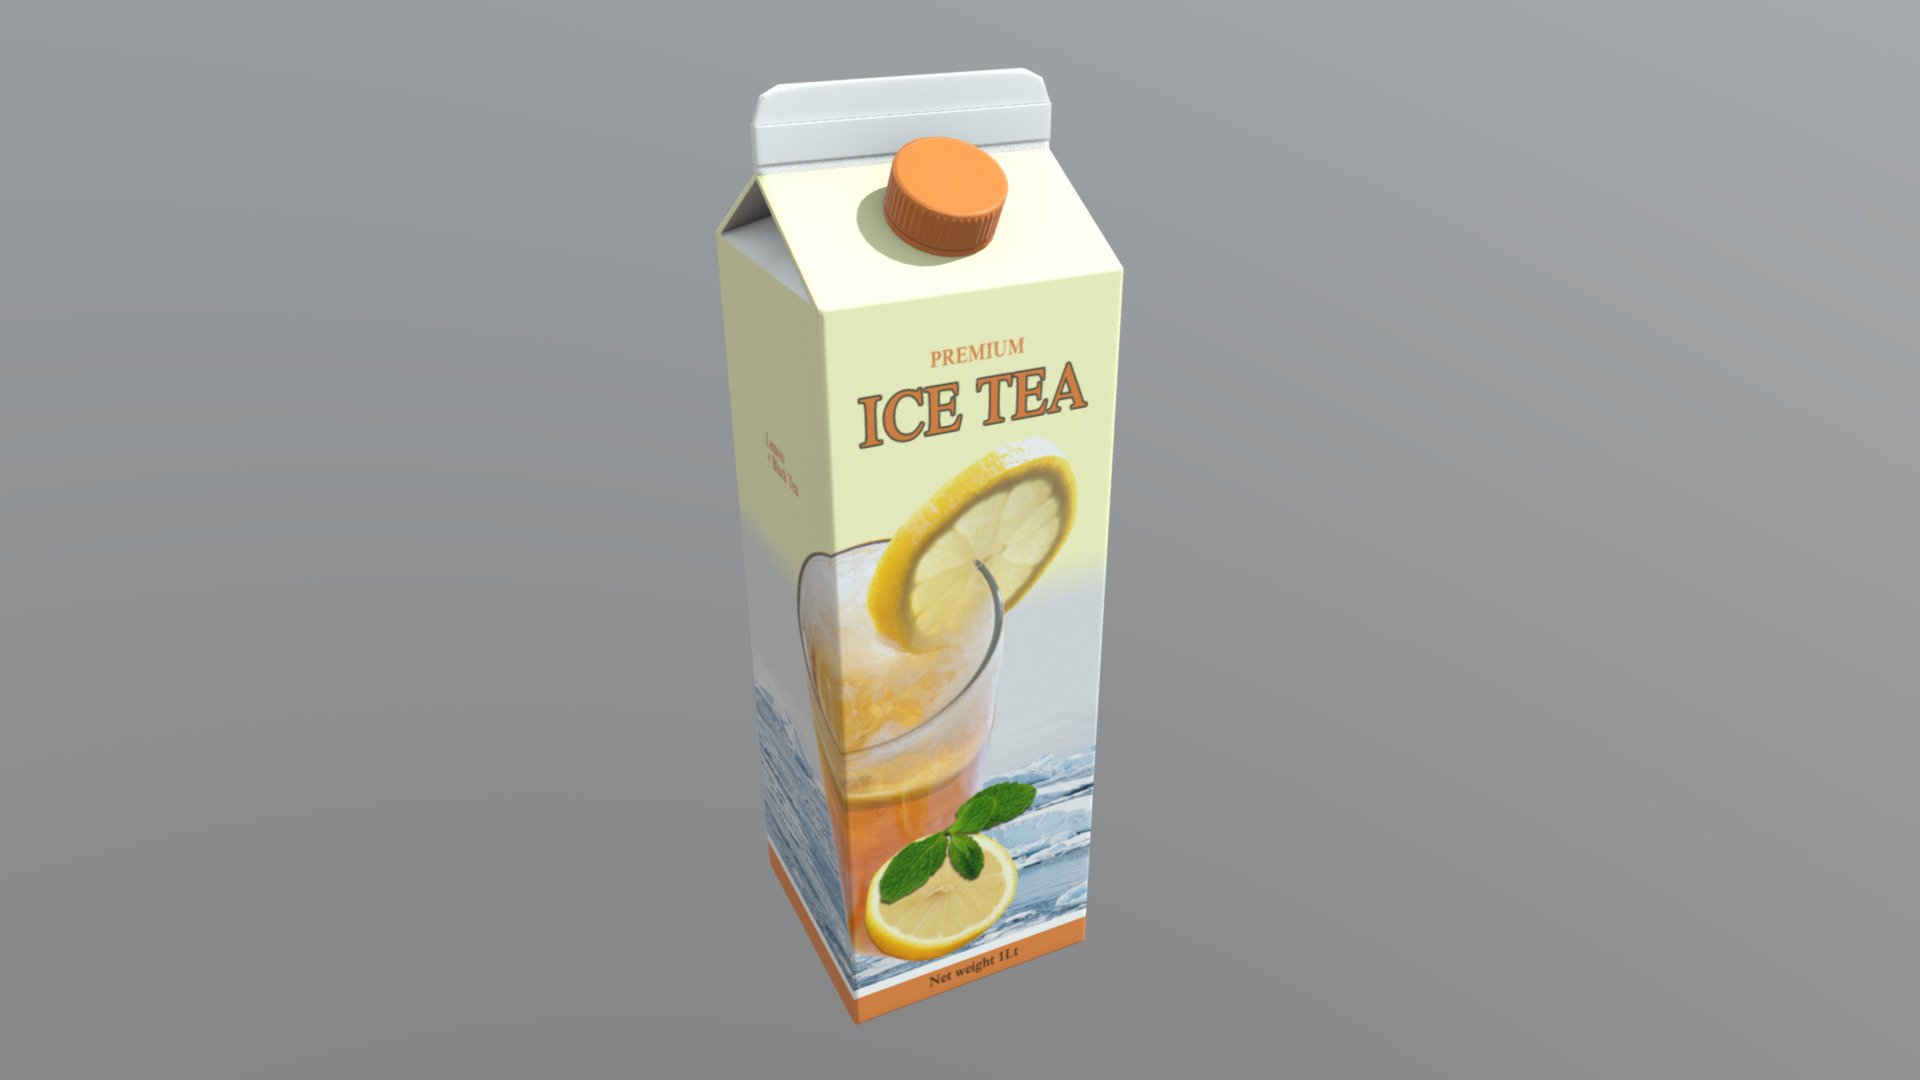 &lsquo;Fresh and tasty Ice Tea, it is like usually Tea but cold.' Includes x2048 PBR textures. The normal map is baked from the high poly model.

If you need help with this model or have a question – please do not hesitate to contact with me. I will be happy to help you.

Contact: plaggy.net@gmail.com - Ice Tea - 3D model by plaggy 3d model